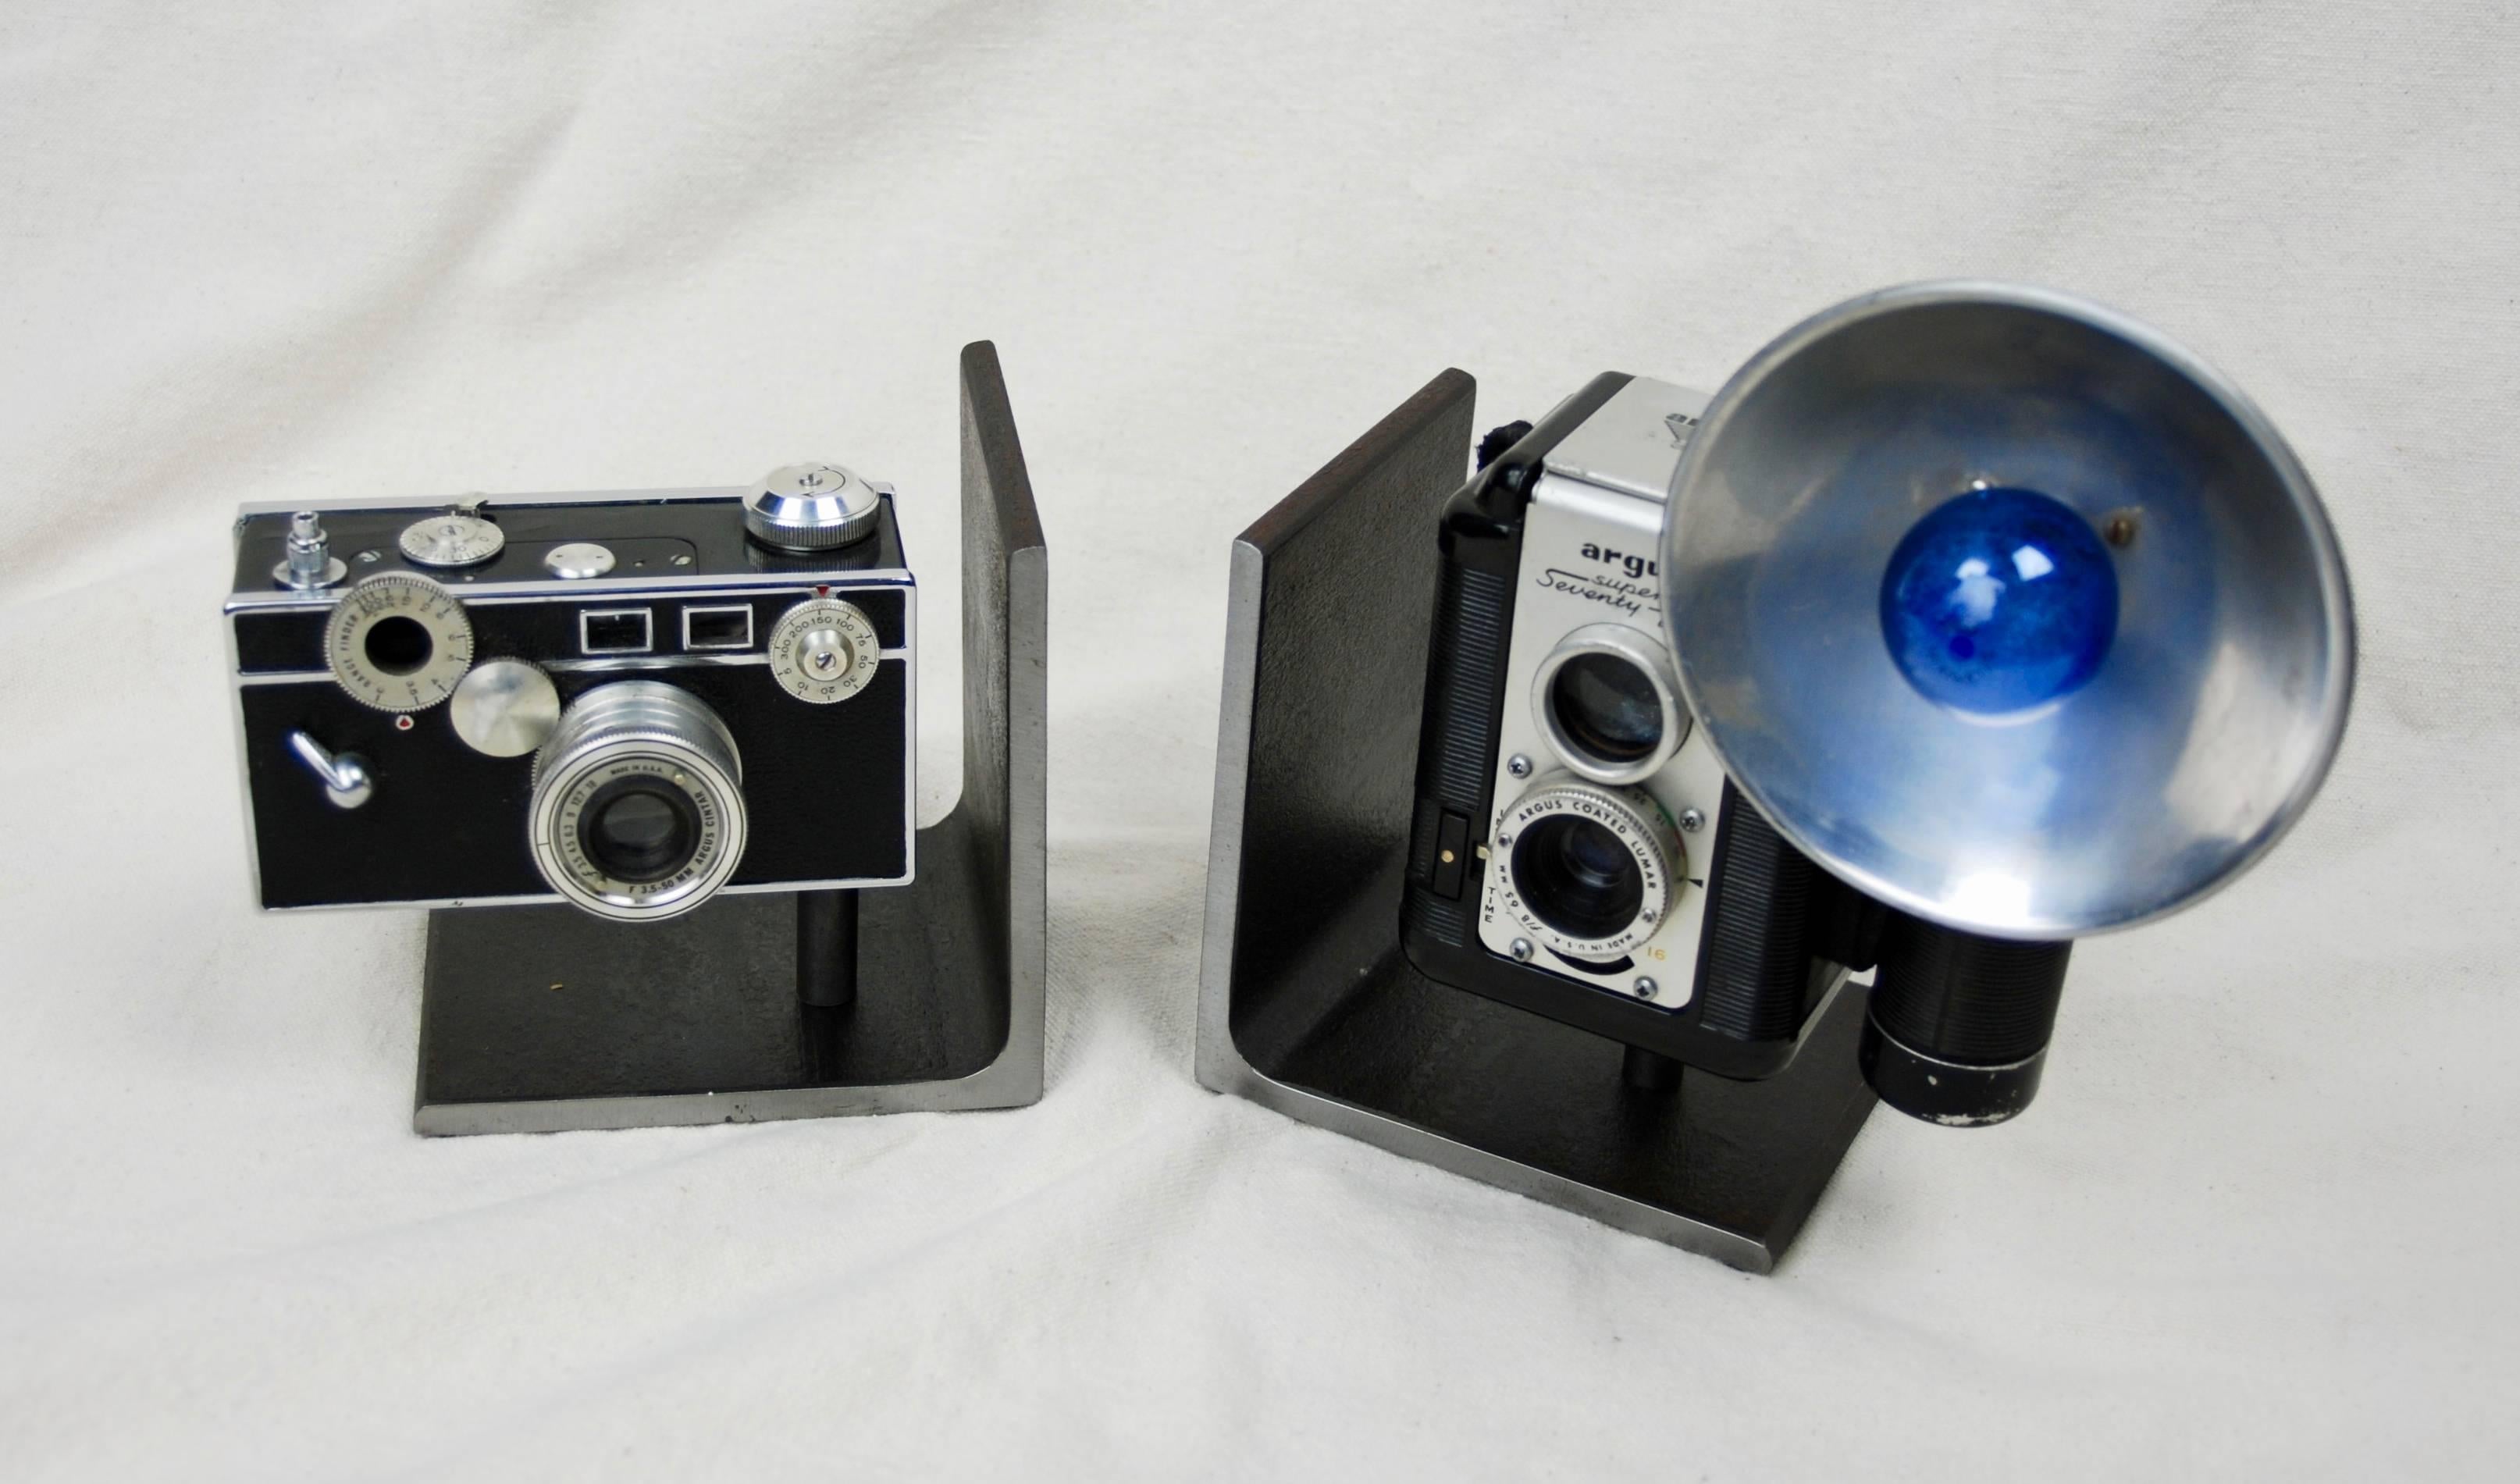 Vintage cameras made into bookends by American artist Breck Armstrong. Cameras attached to heavy steel base.